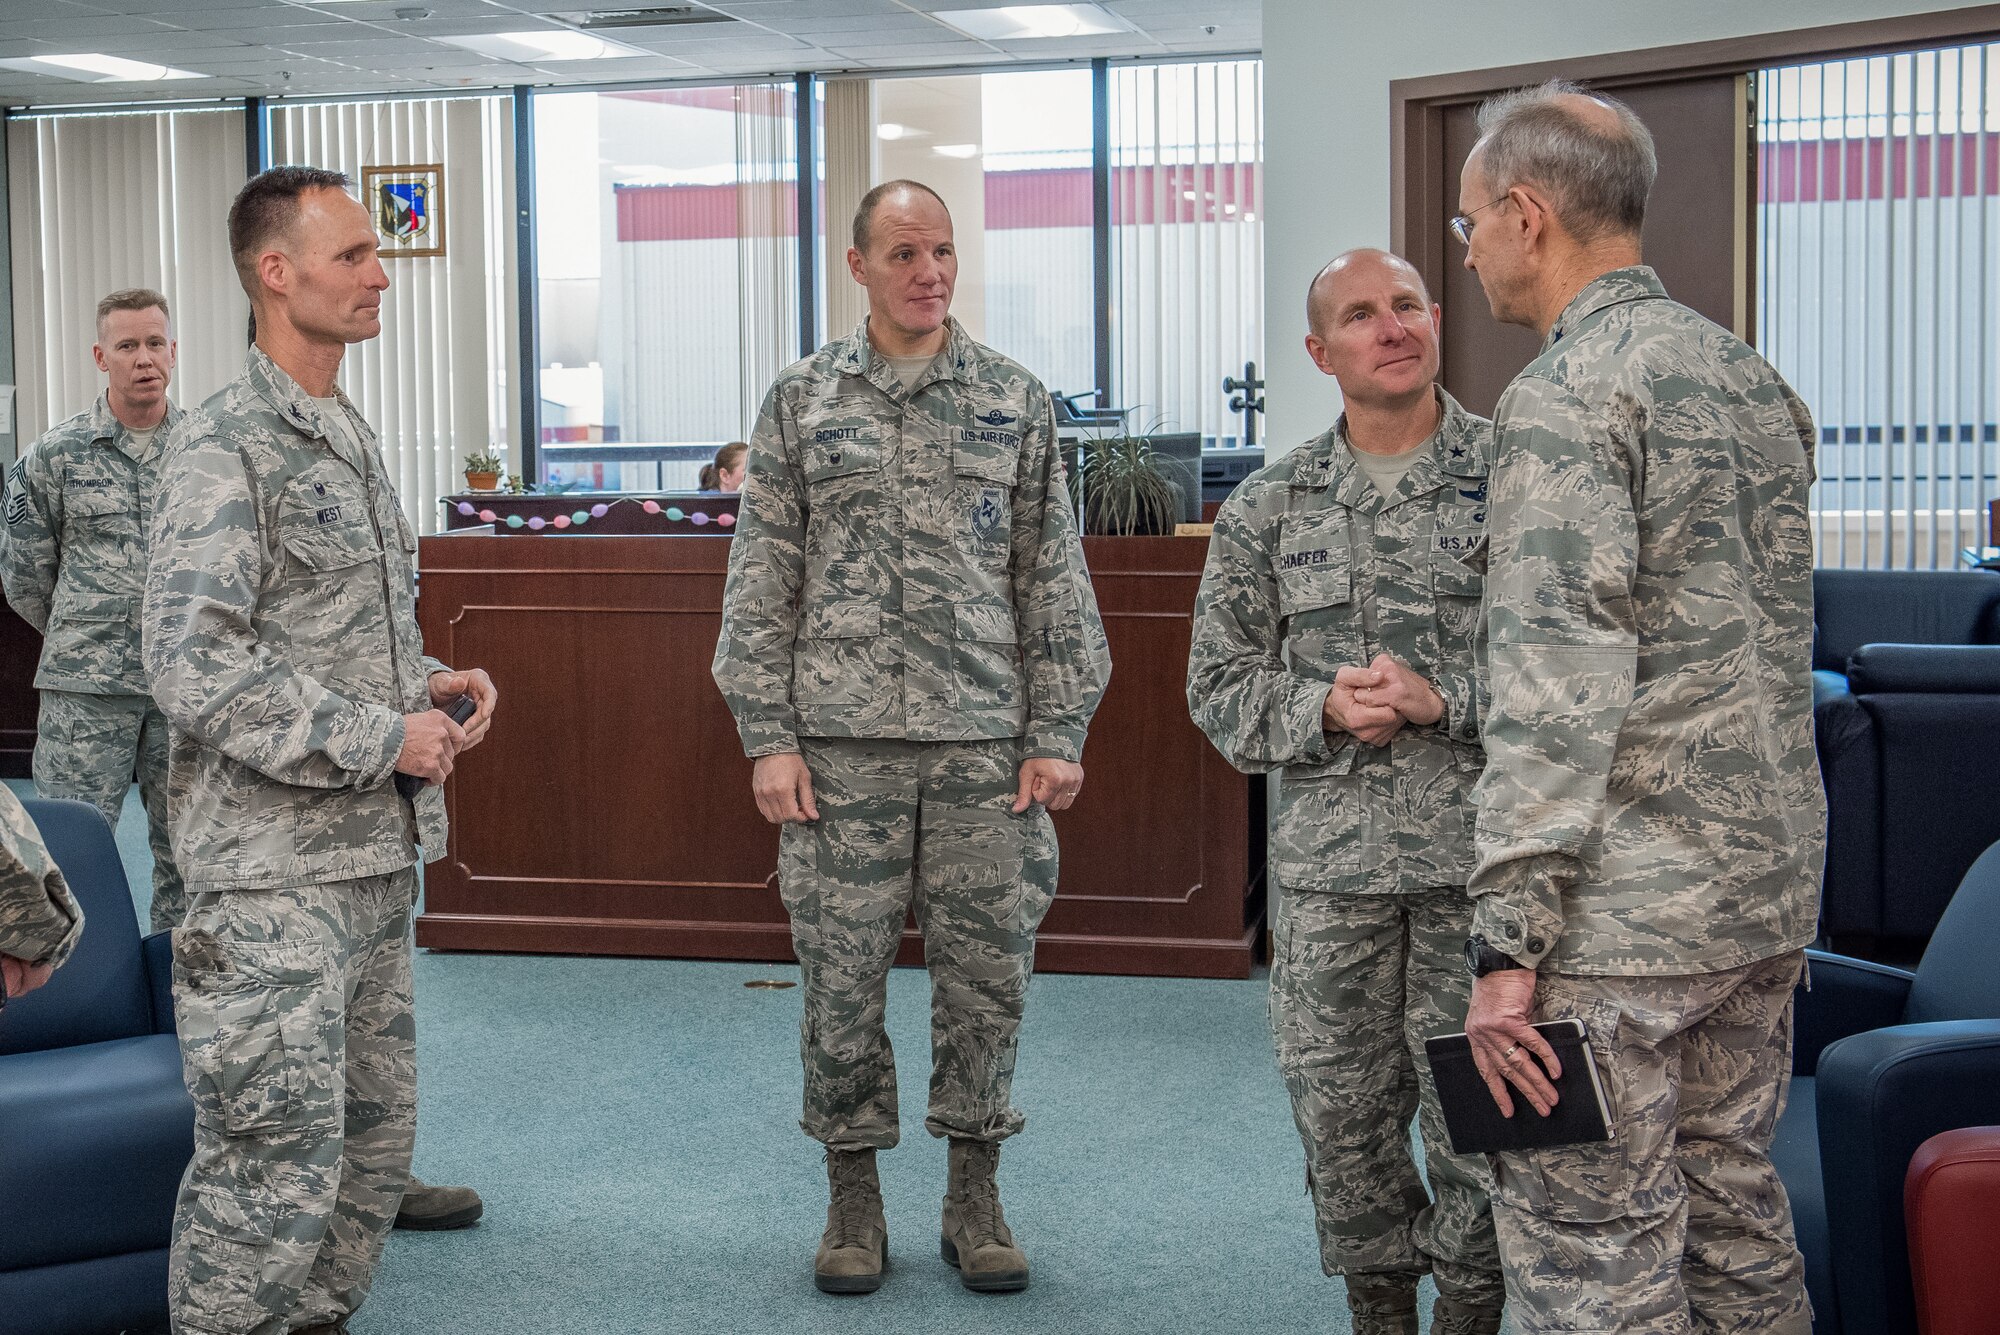 Photos of Lt. Gen. Mark Ediger, U.S. Air Force Surgeon General, and entourage on a tour of various facilities on and around Edwards Air Force Base